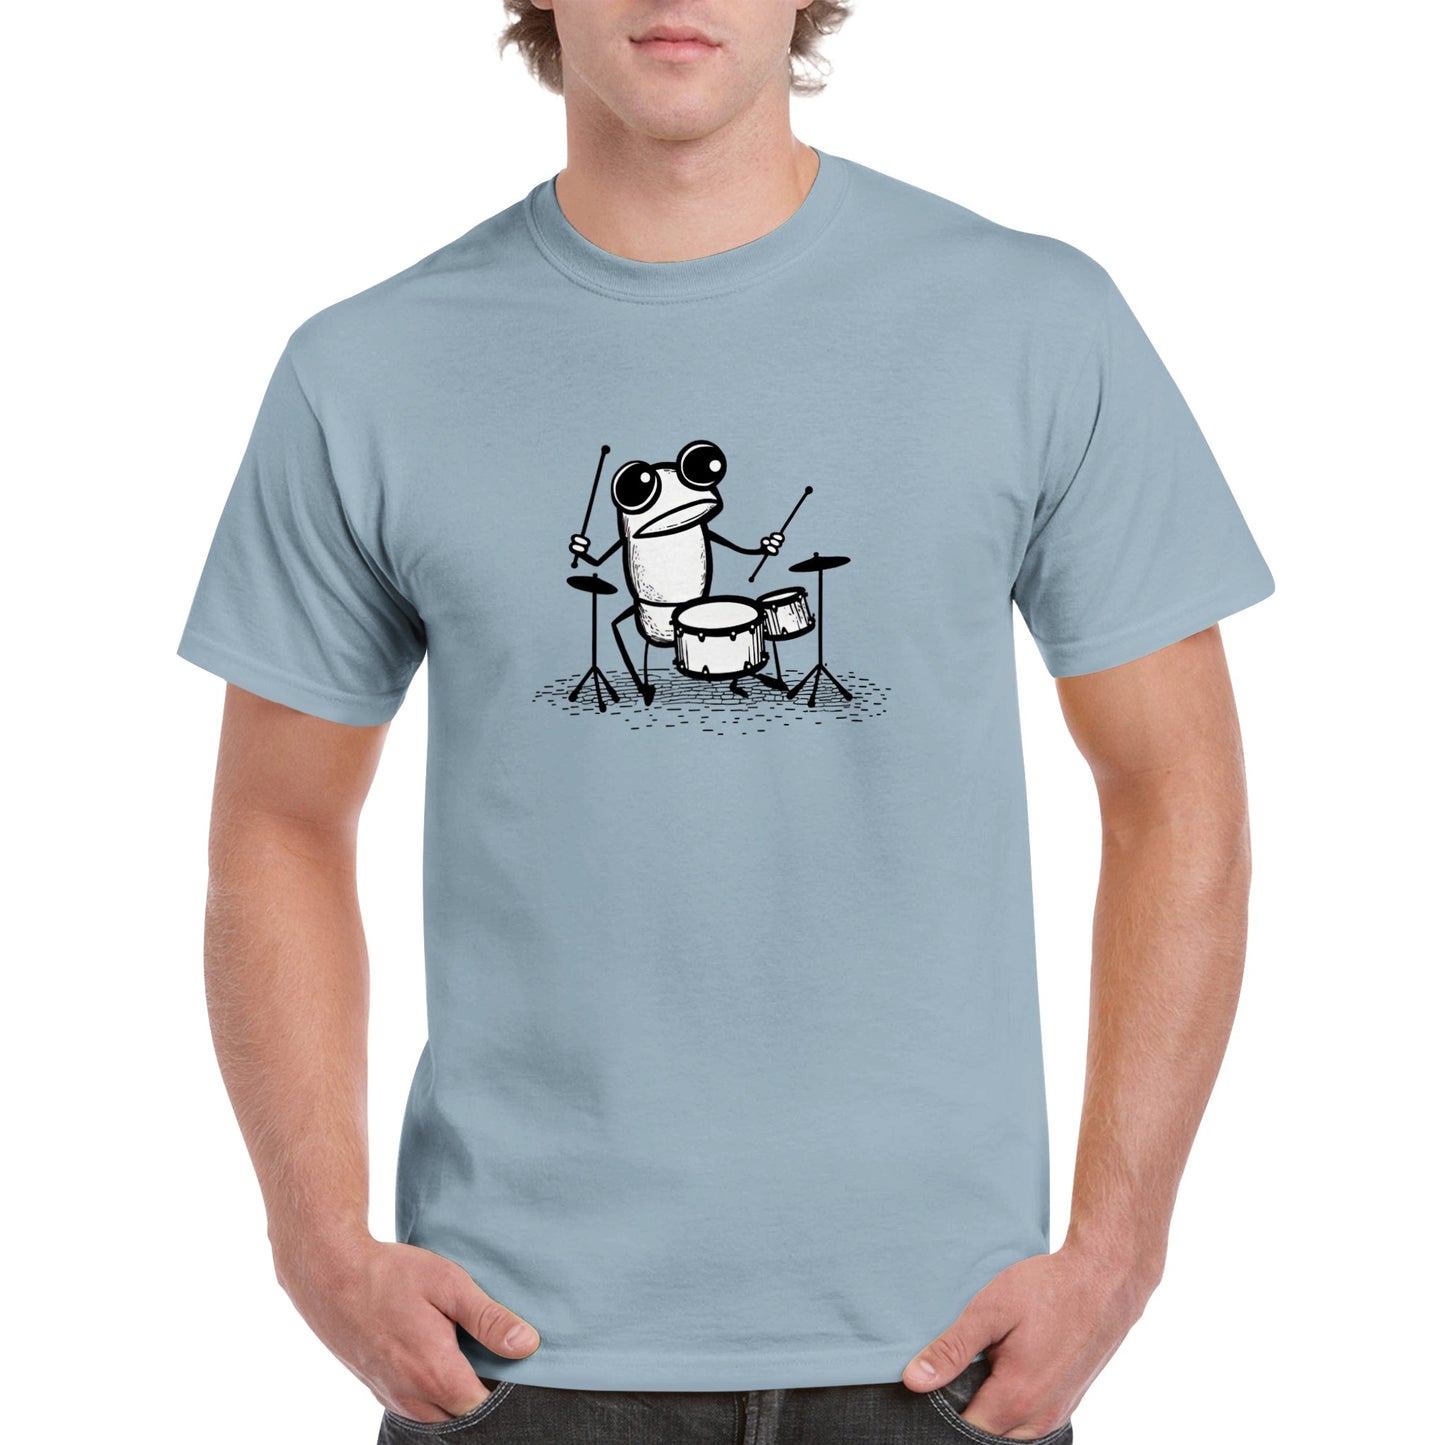 Frog playing the drums Heavyweight Unisex Crewneck T-shirt